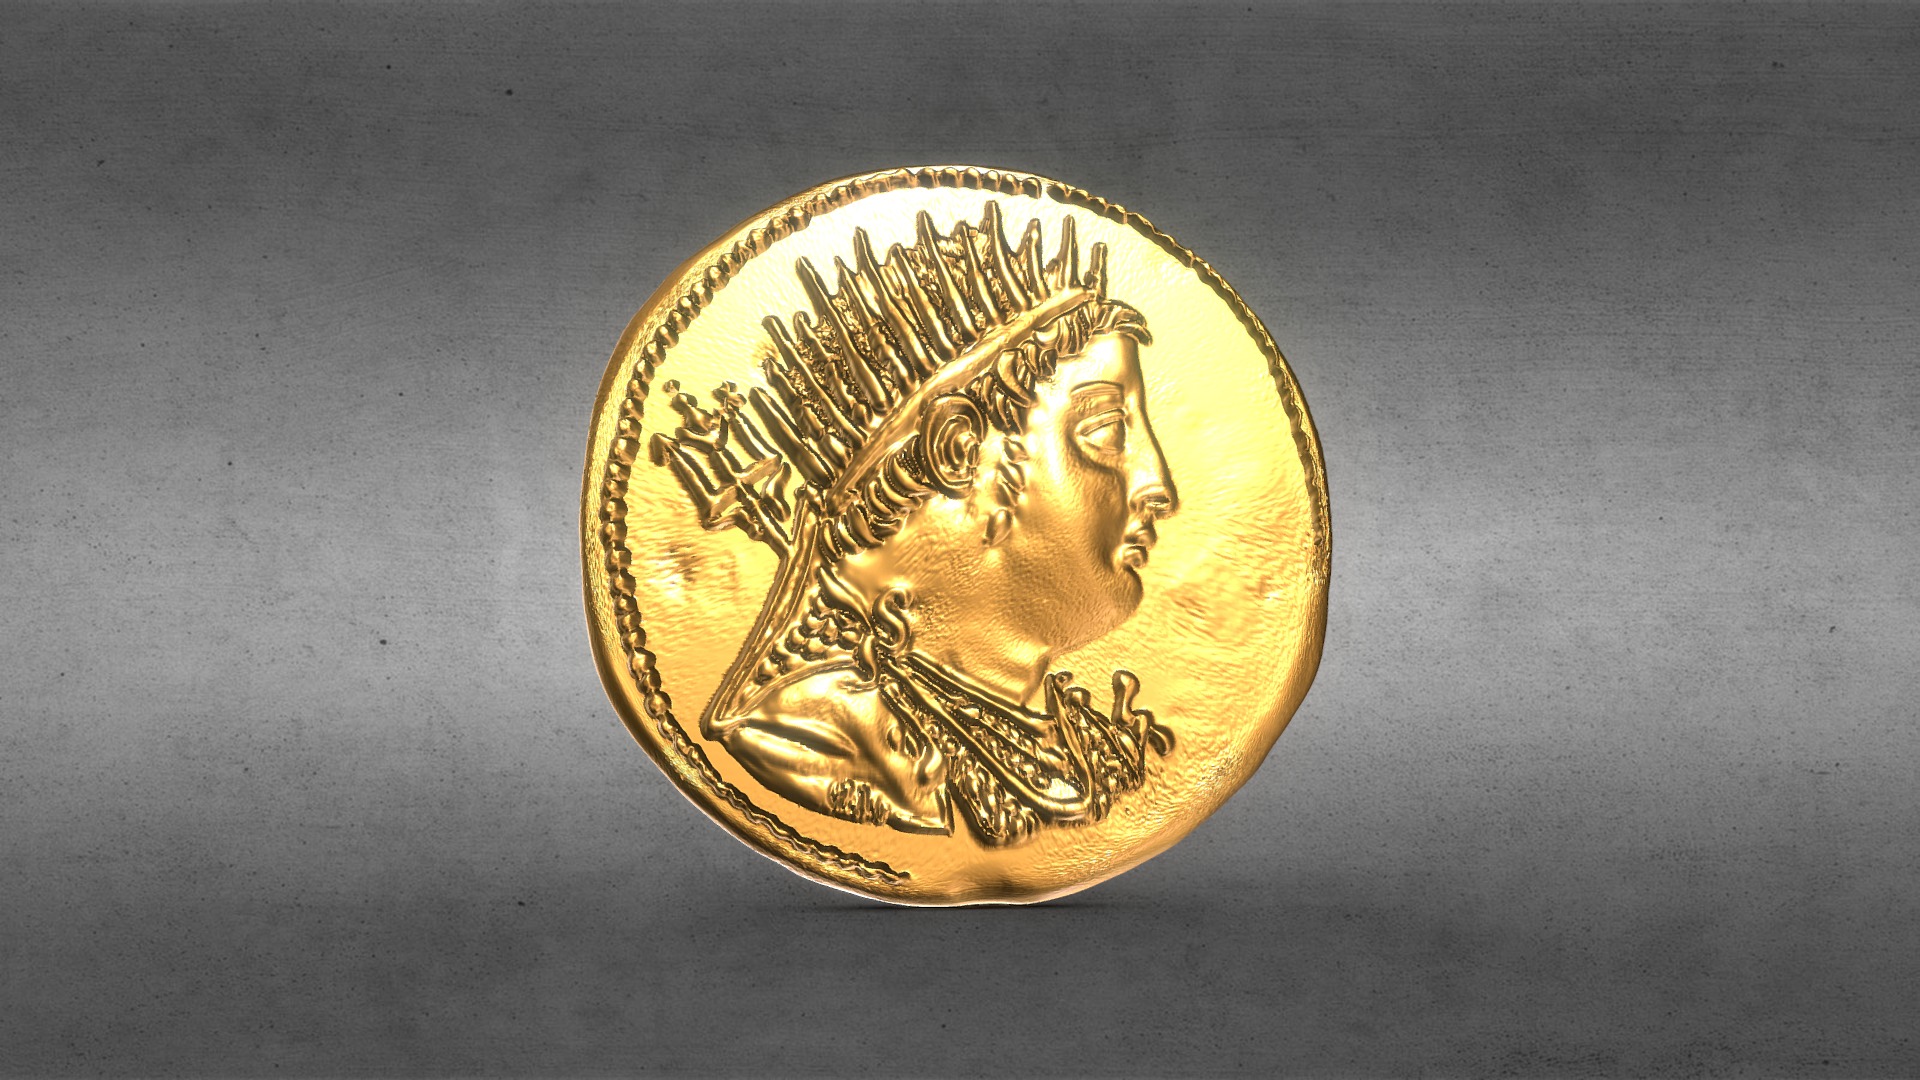 3D model Gold Oktadrachm - This is a 3D model of the Gold Oktadrachm. The 3D model is about a gold coin with a lion on it.